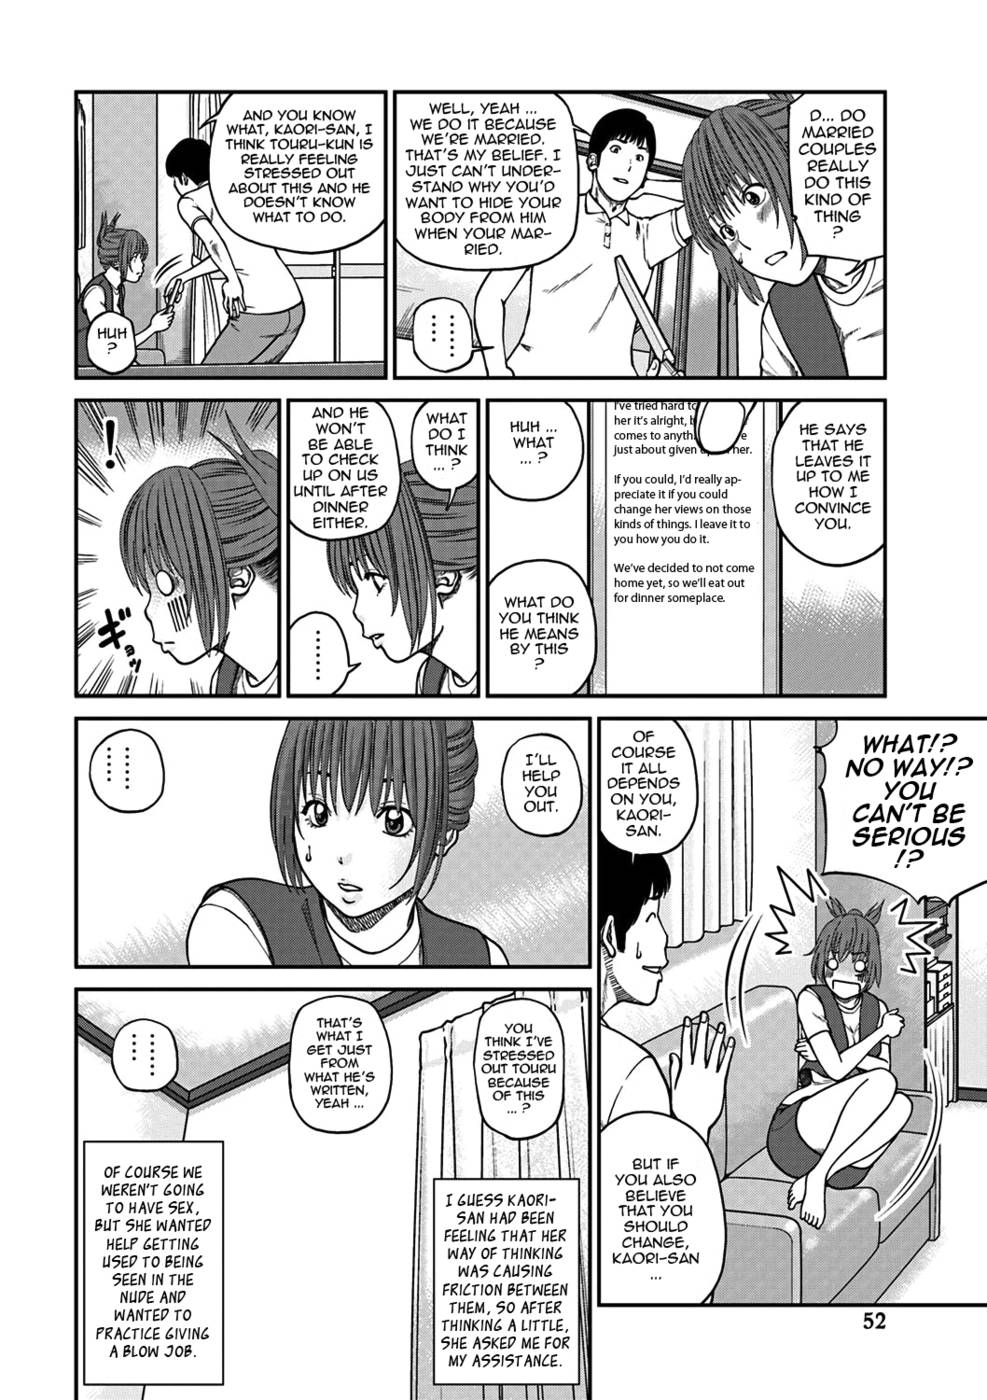 33 Year Old Unsatisfied Wife-Chapter 3-Spouse Swapping-Second Day-Hentai Manga Hentai Comic photo picture